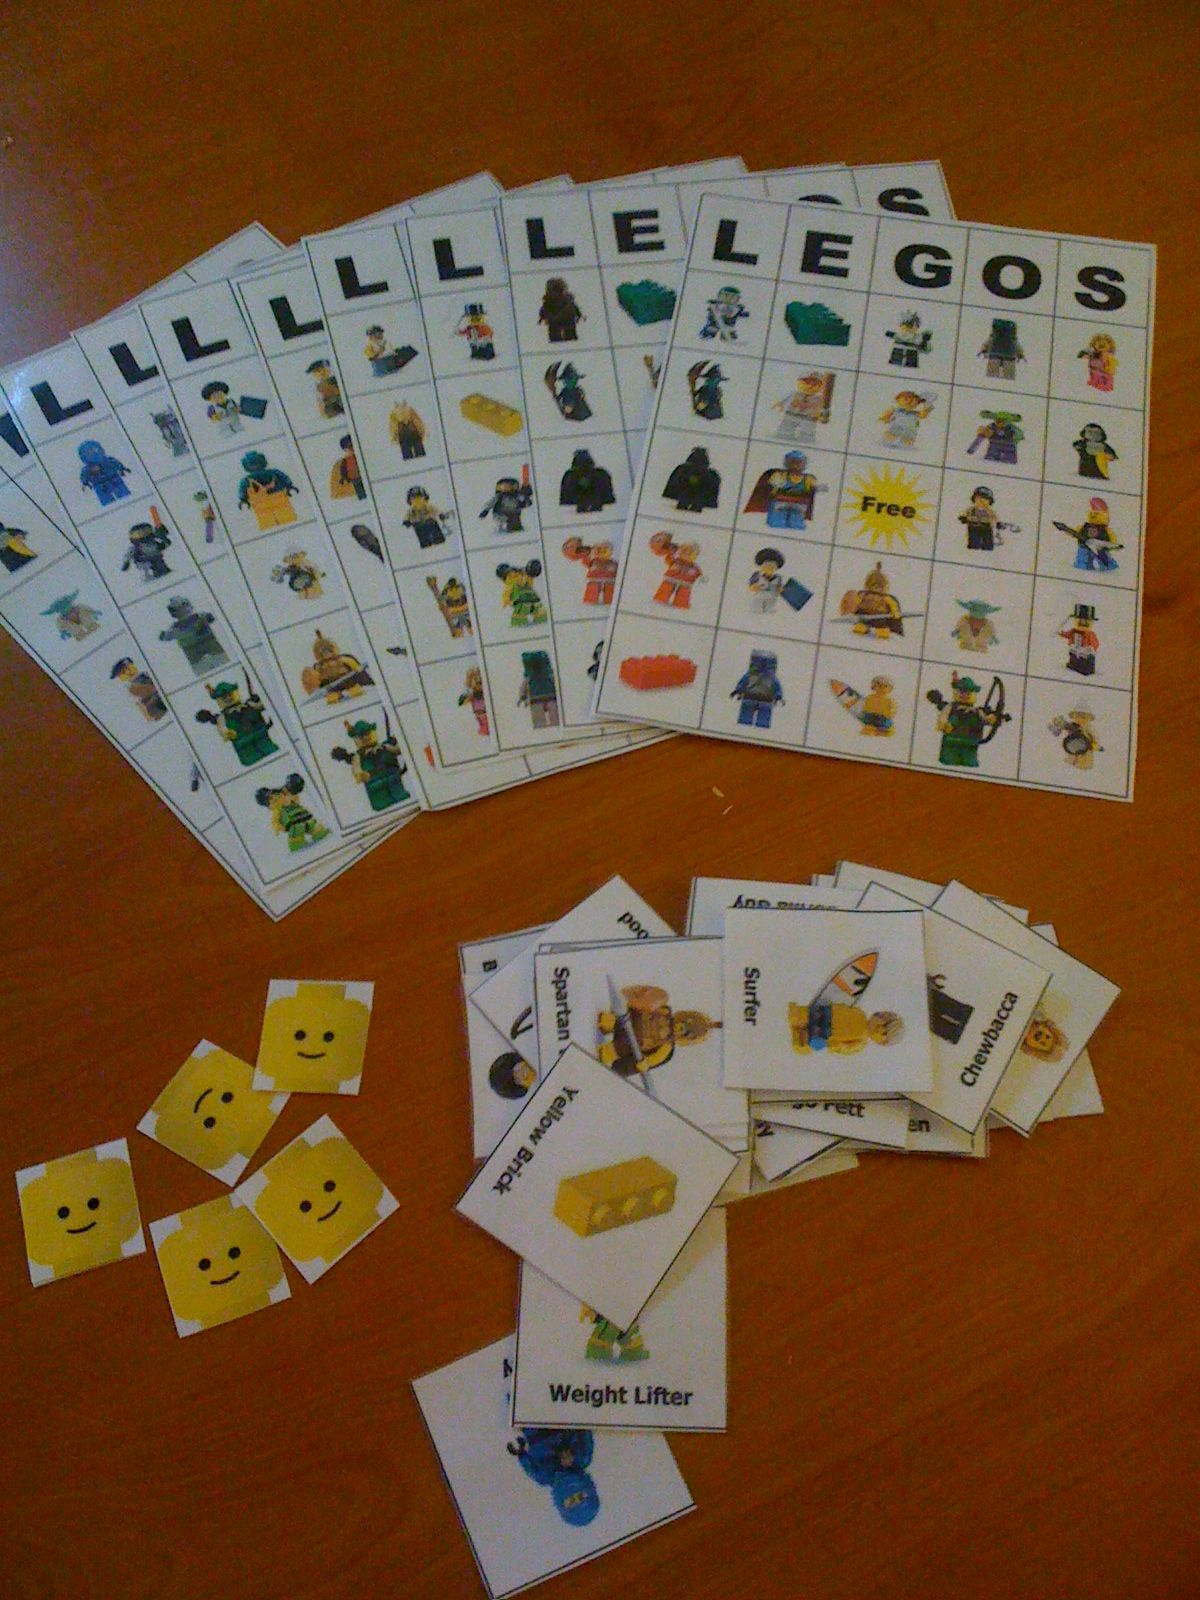 Lego Bingo Is A Free Download From A Blogger&amp;#039;s Site